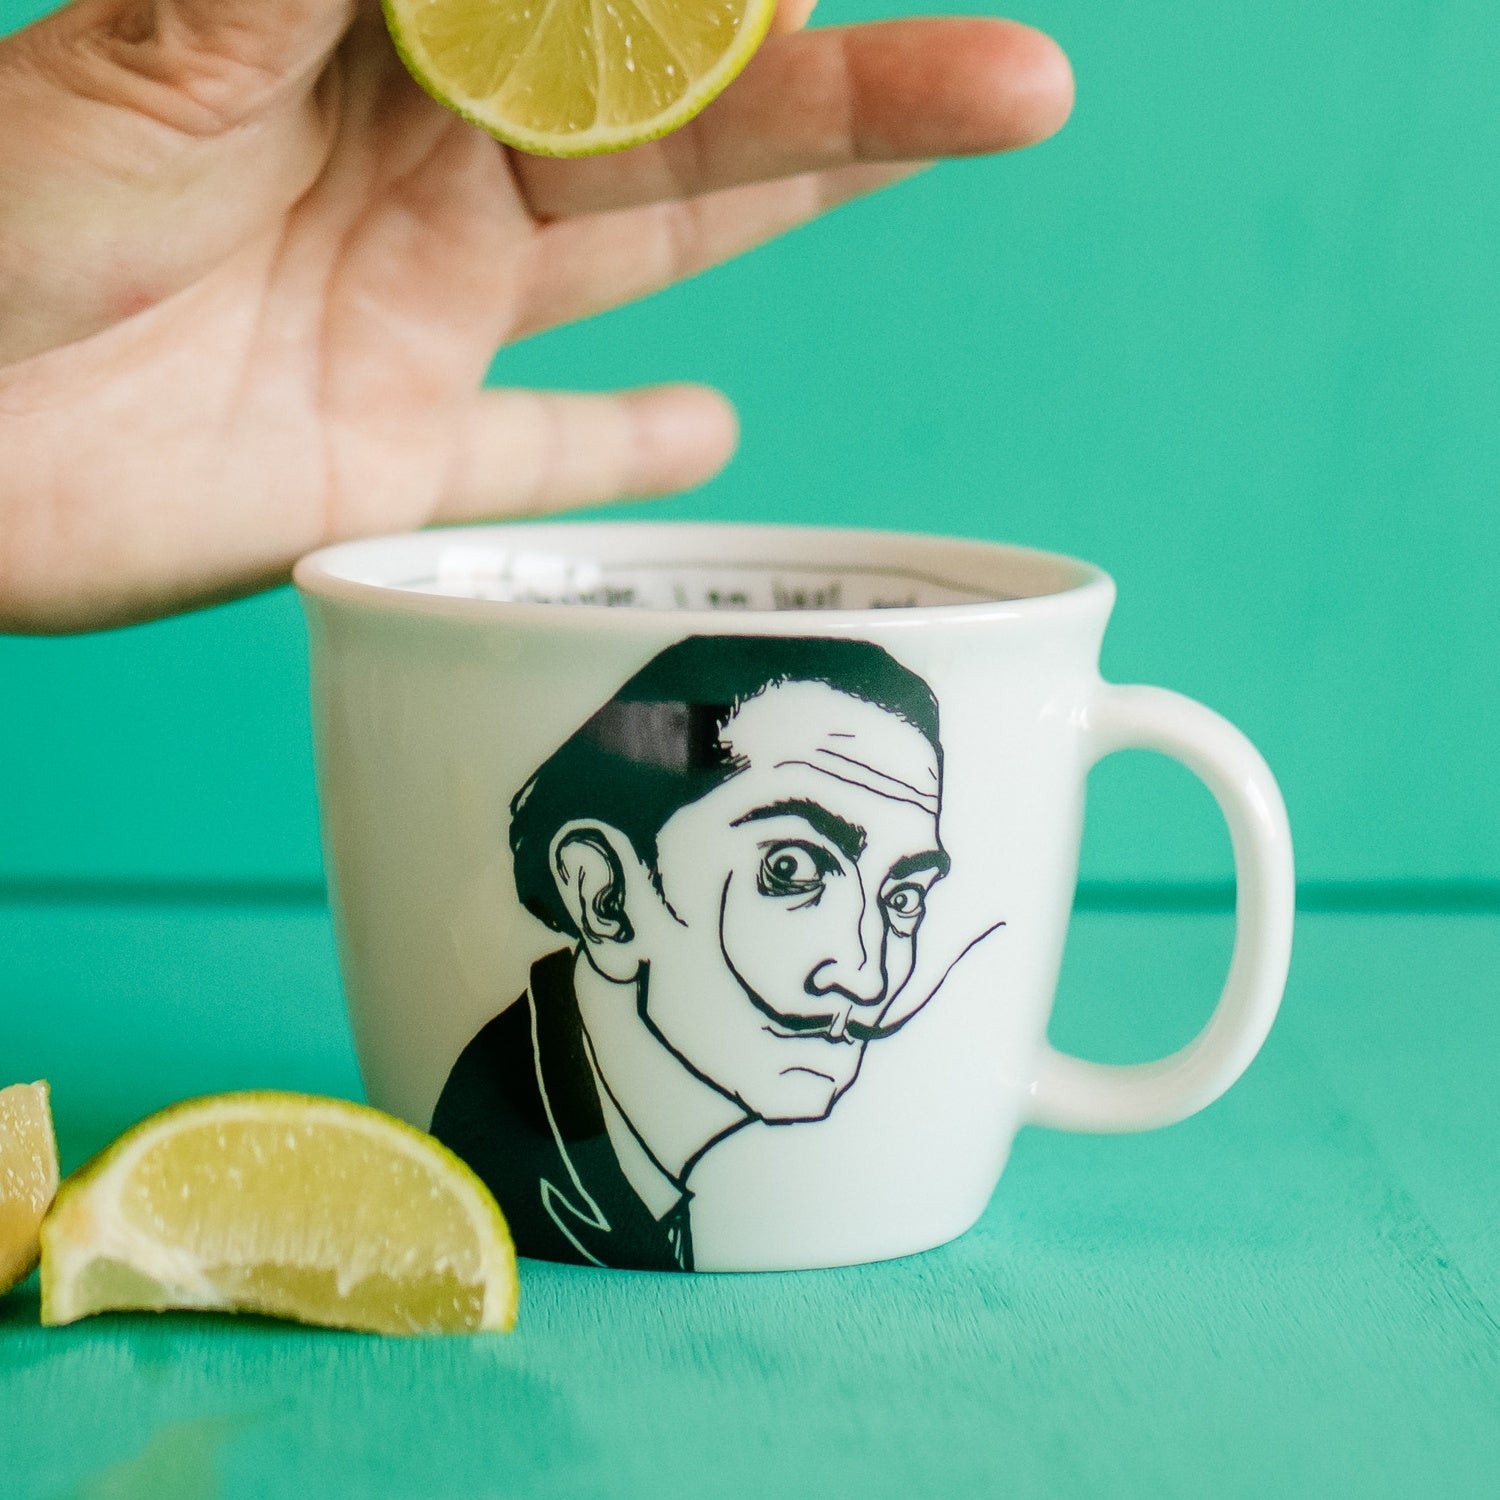 Porcelain cup inspired by Salvador Dali with limes